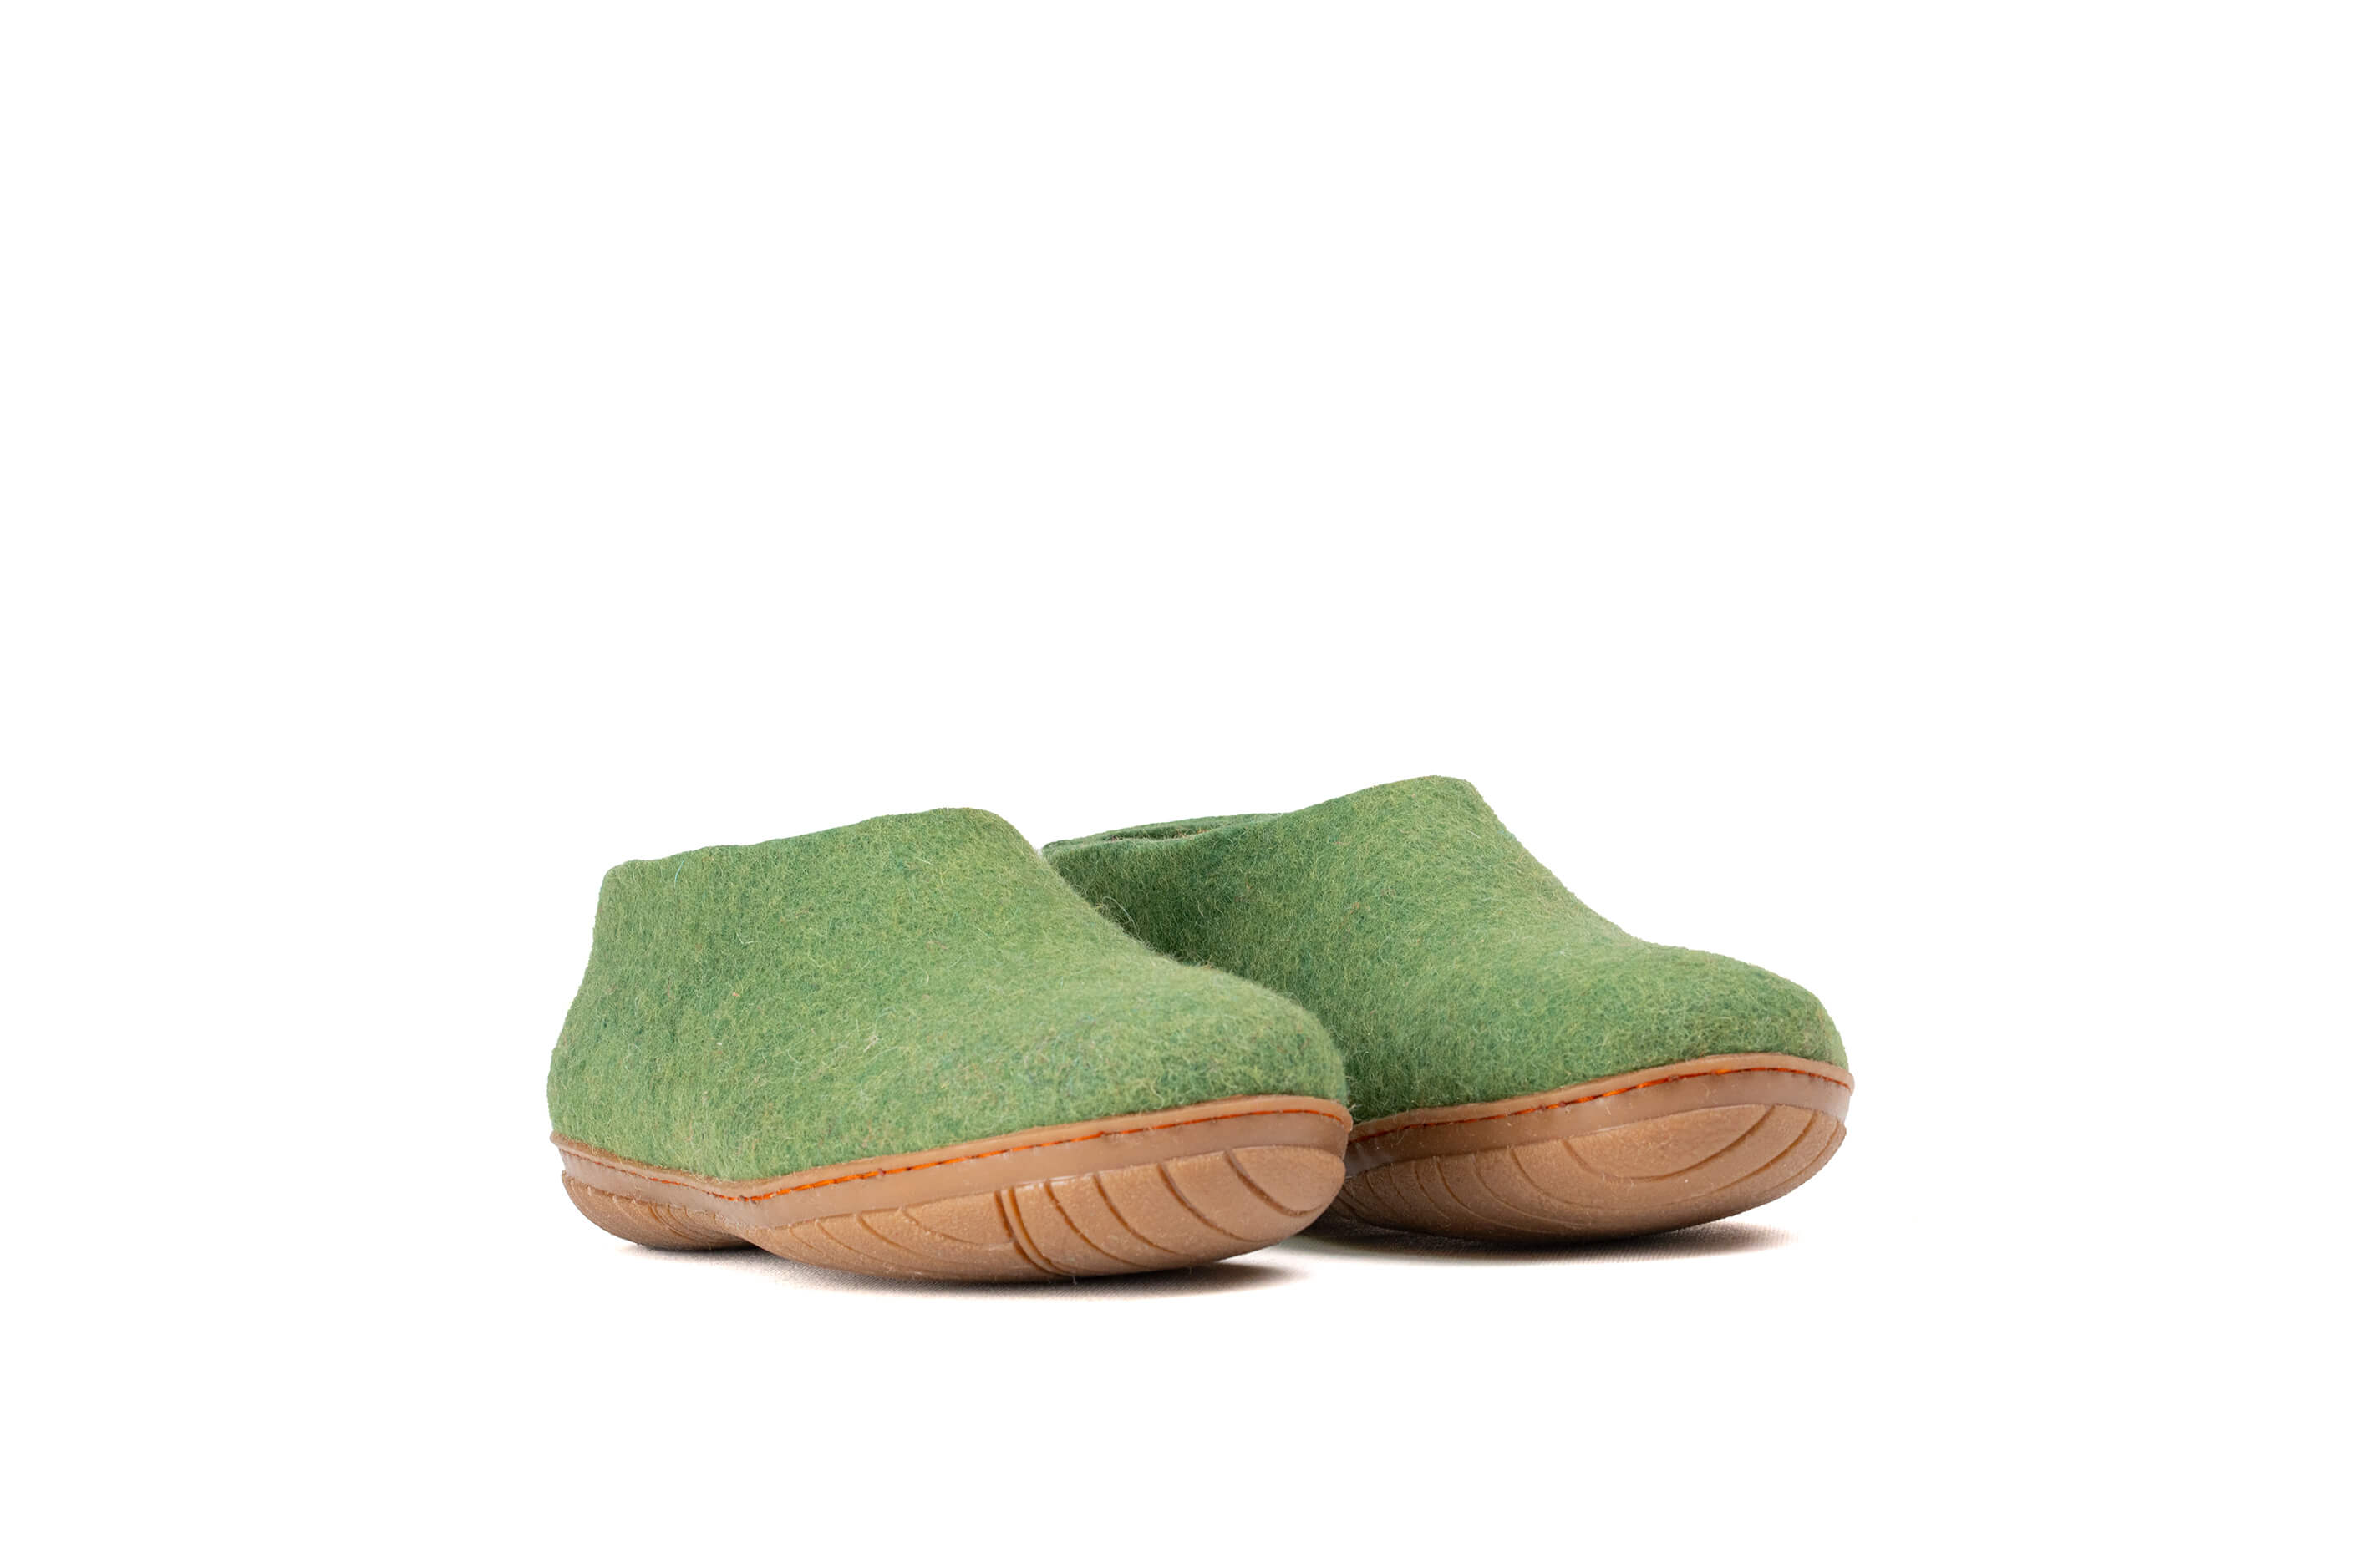 Outdoor Shoes With Rubber Sole - Green